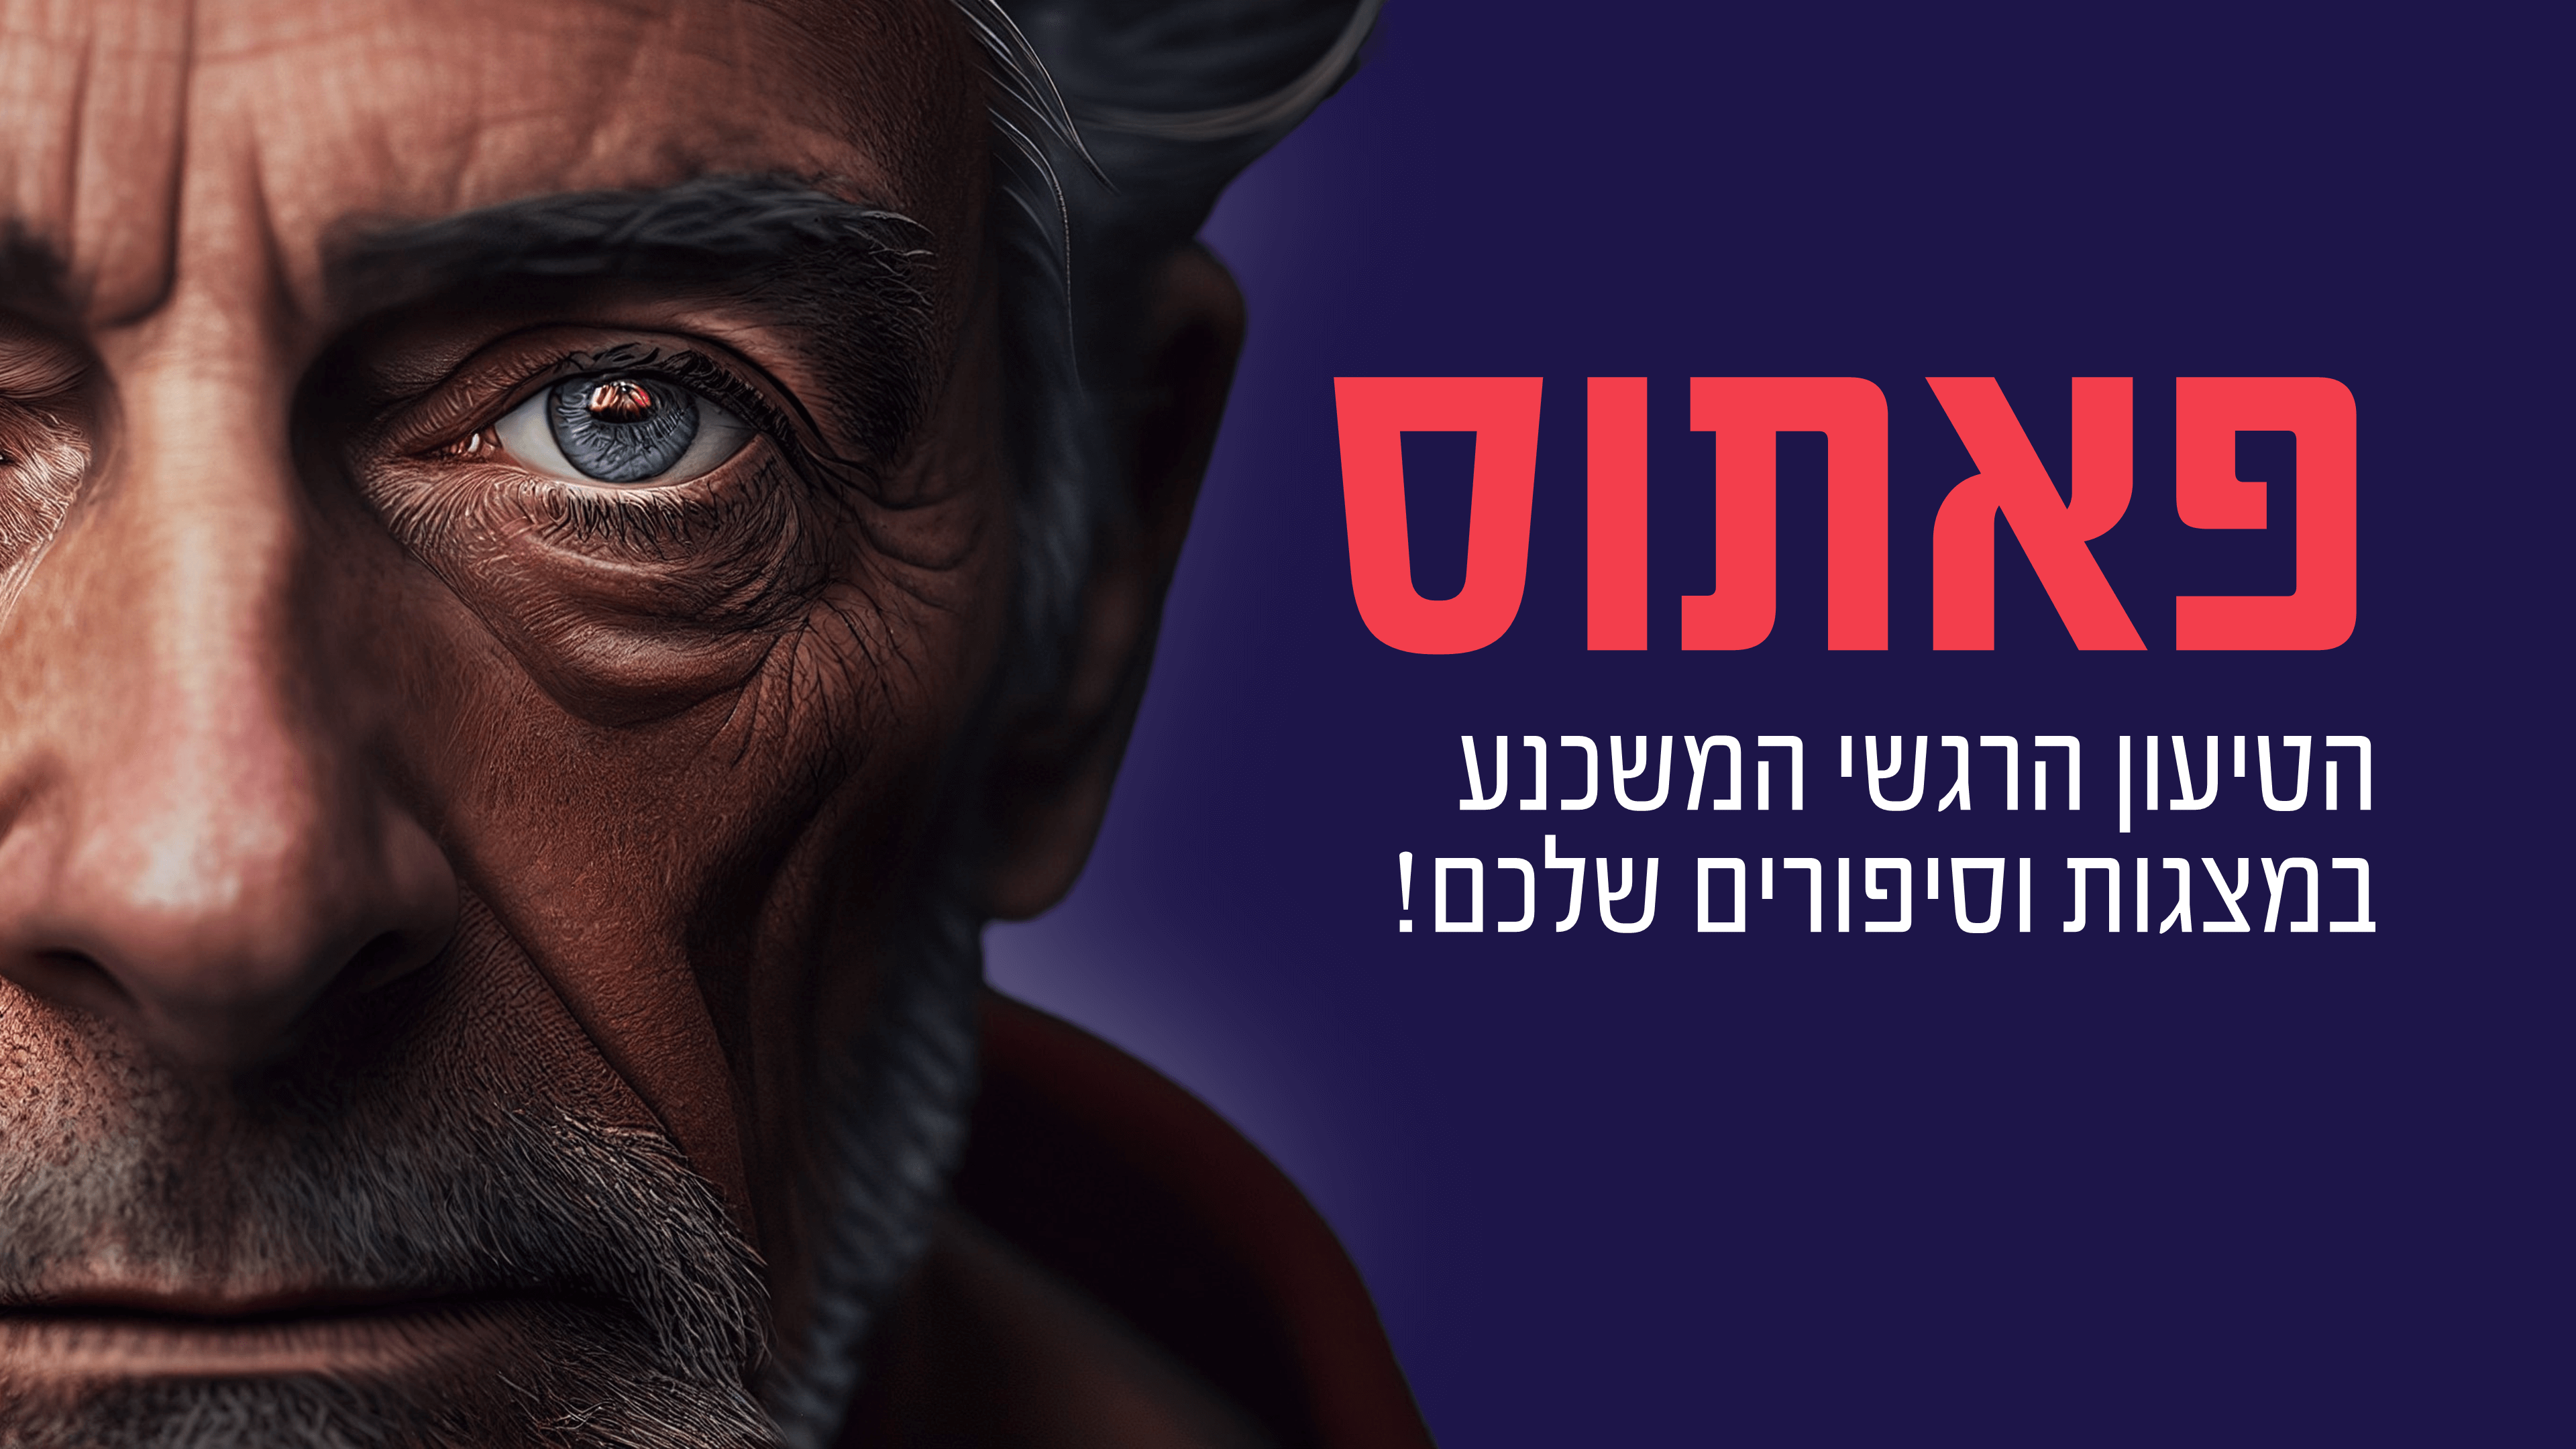 Read more about the article כוחו של הפאתוס:  מסרים מבוססי רגשות במצגות ובסטוריטלינג